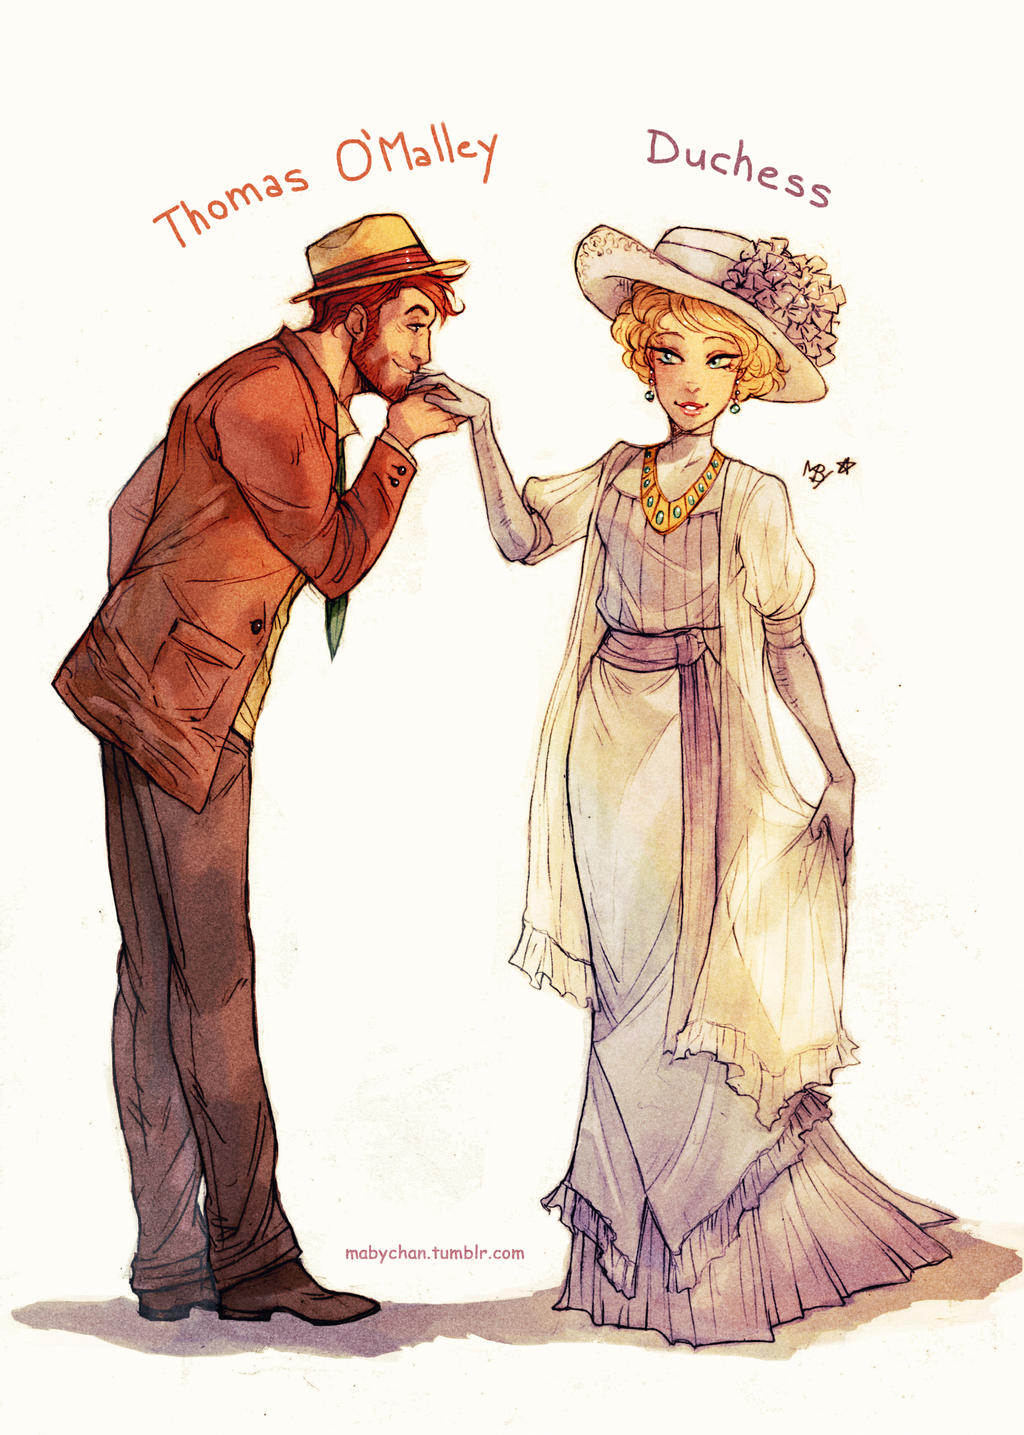 http://img00.deviantart.net/ab1f/i/2014/350/5/3/the_aristocats_humanized_by_maby_chan-d8a3ava.jpg